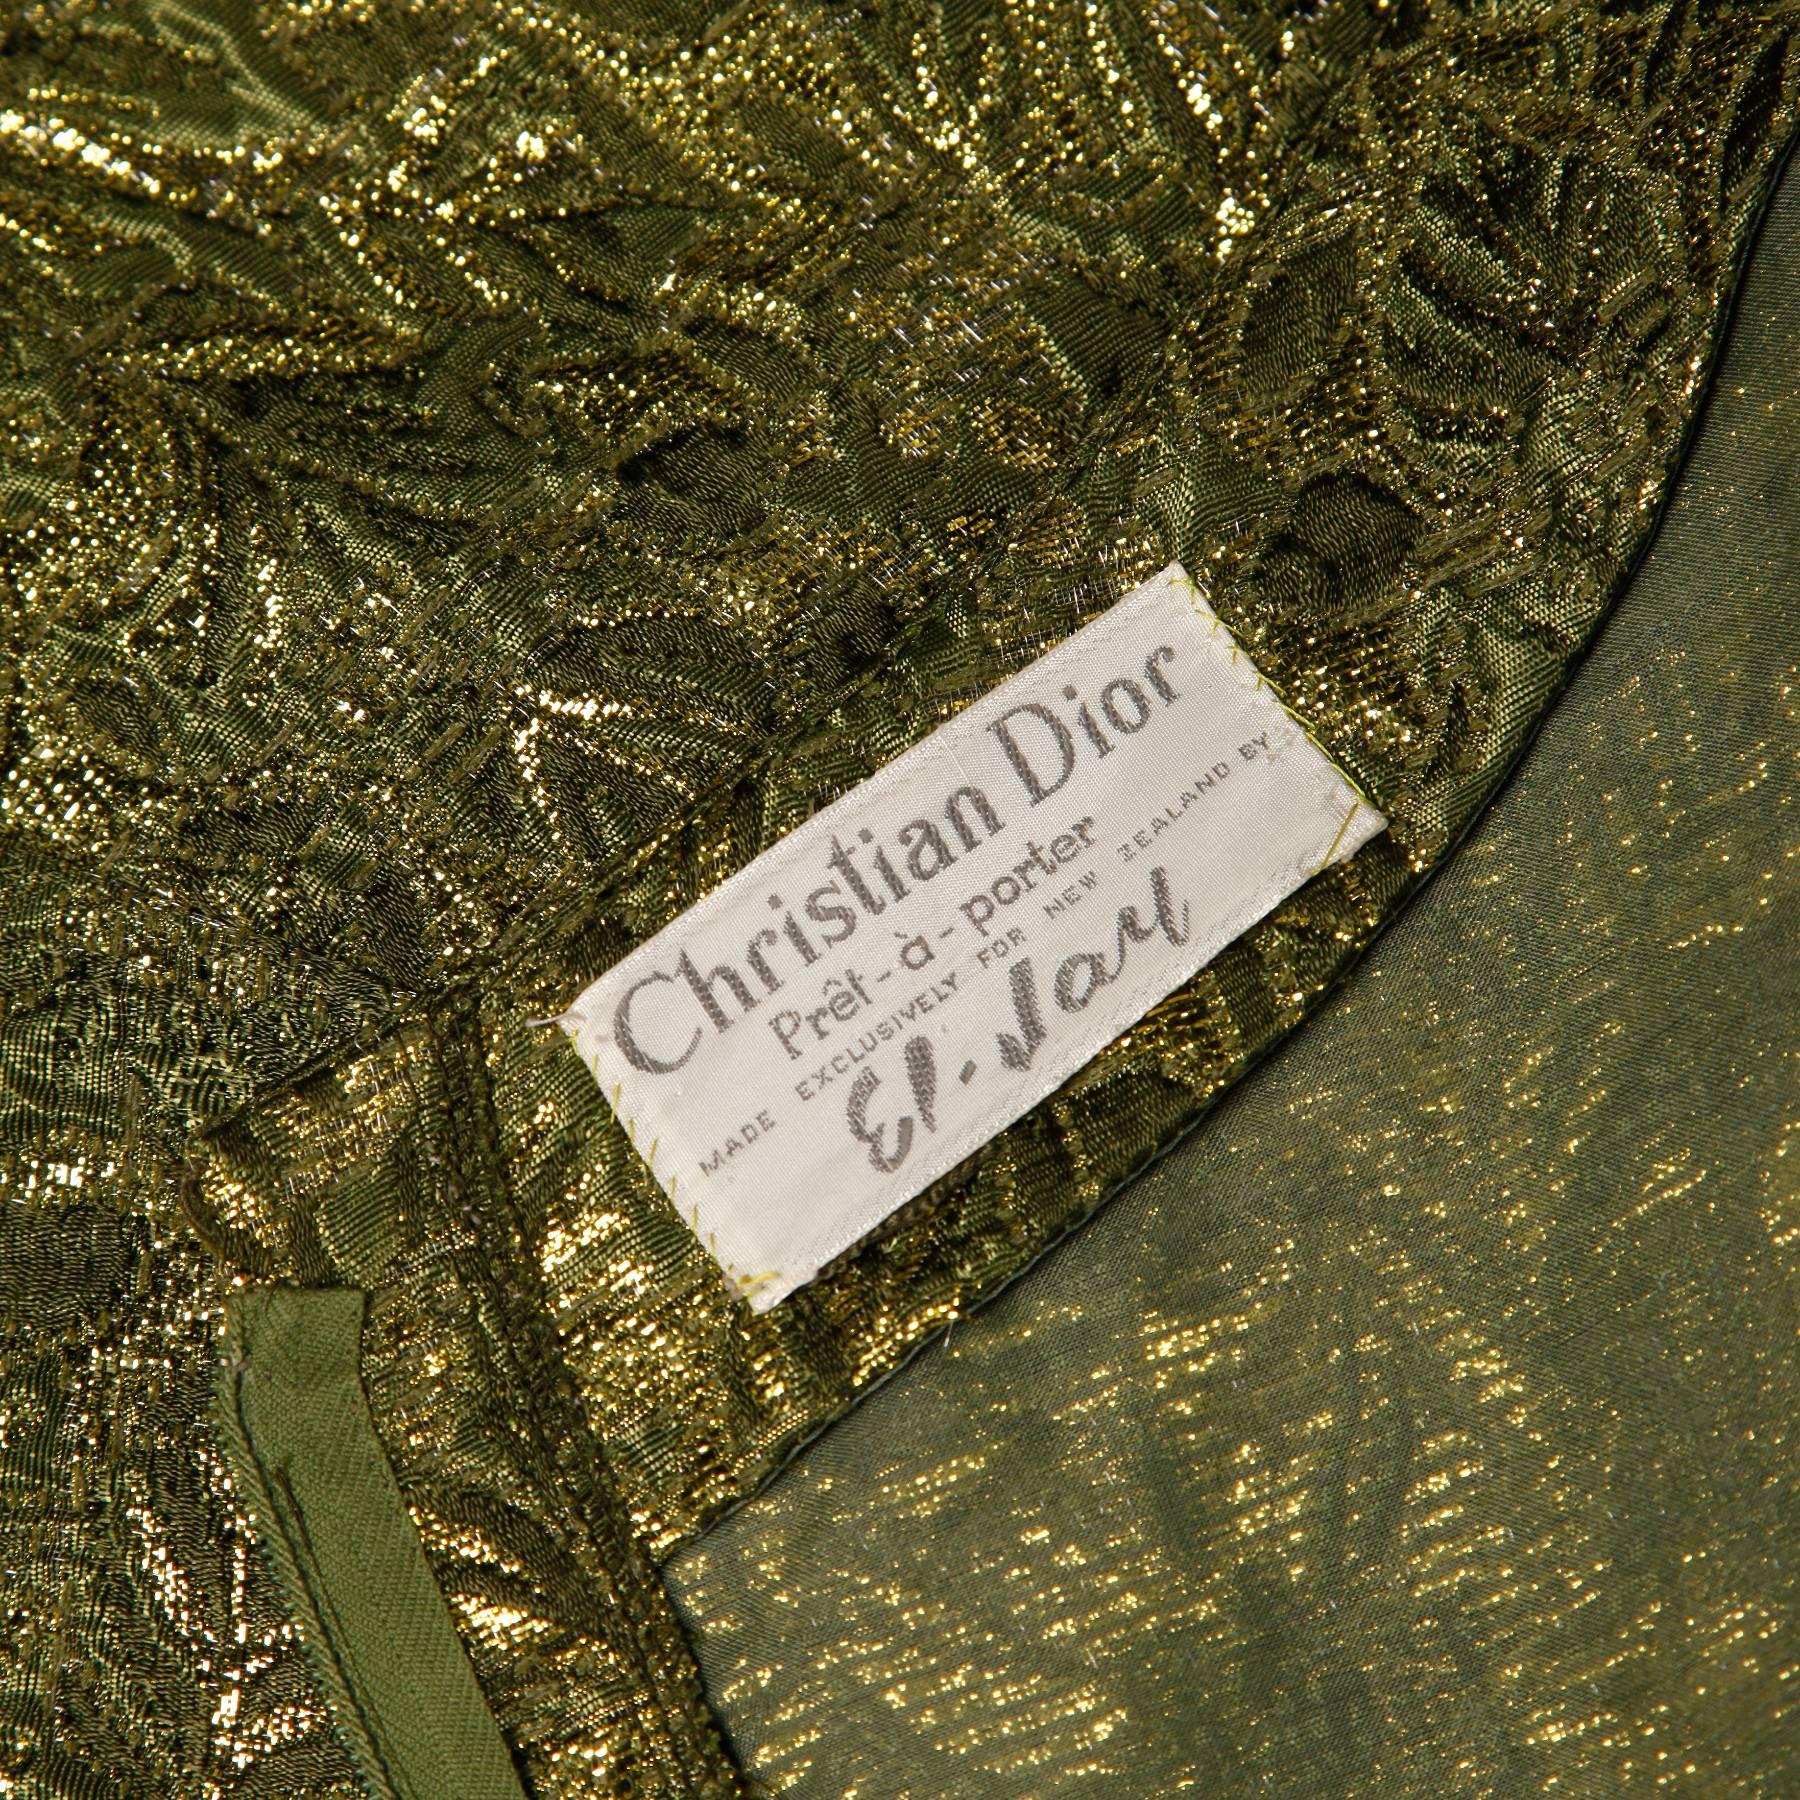 Ultra rare 1960s Christian Dior cocktail dress in metallic green and gold brocade. Empire waistline and button detail. The dress has a scoop neck and short sleeves. The construction of this dress is just gorgeous! It is fully lined in silk and is